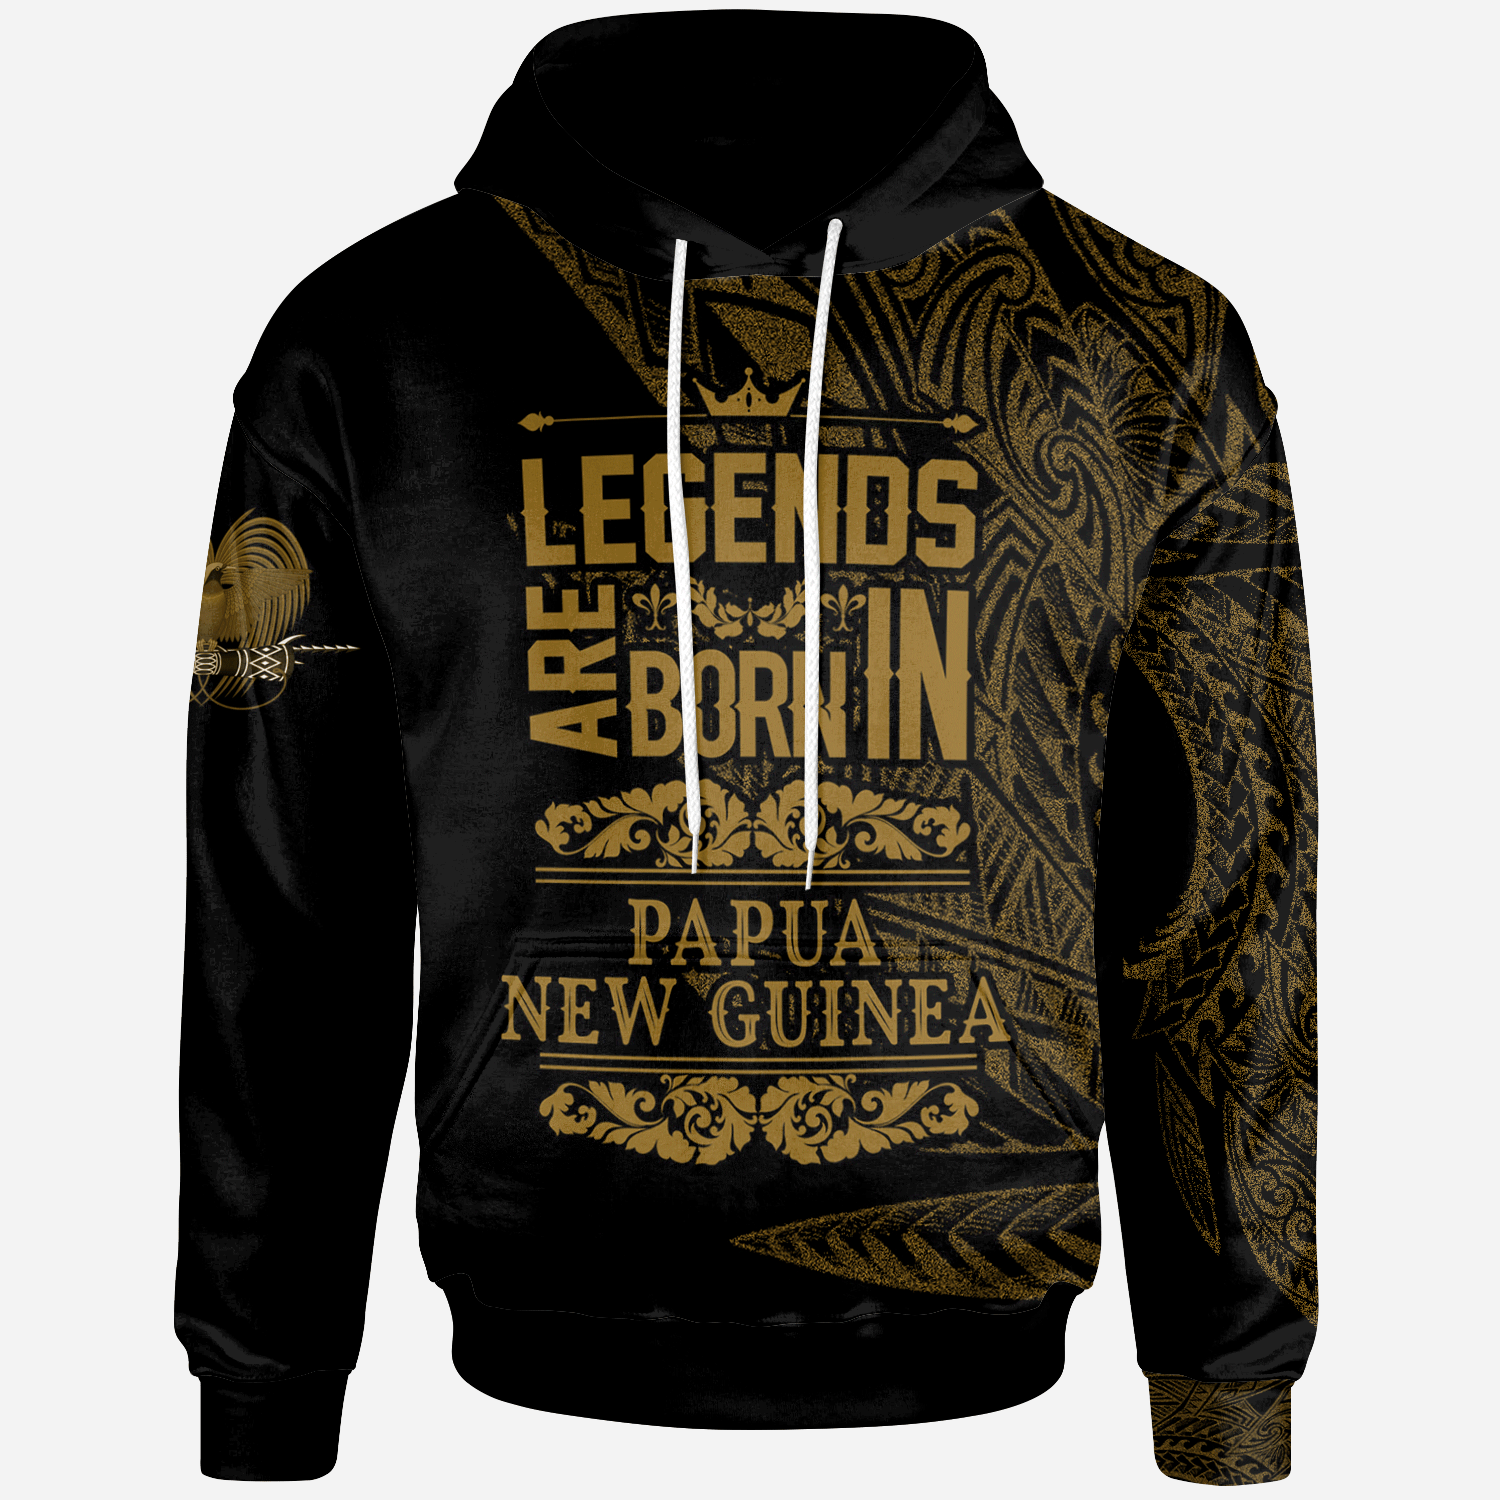 Papua New Guinea Hoodie Legends Are Born In Gold Color Unisex Gold - Polynesian Pride